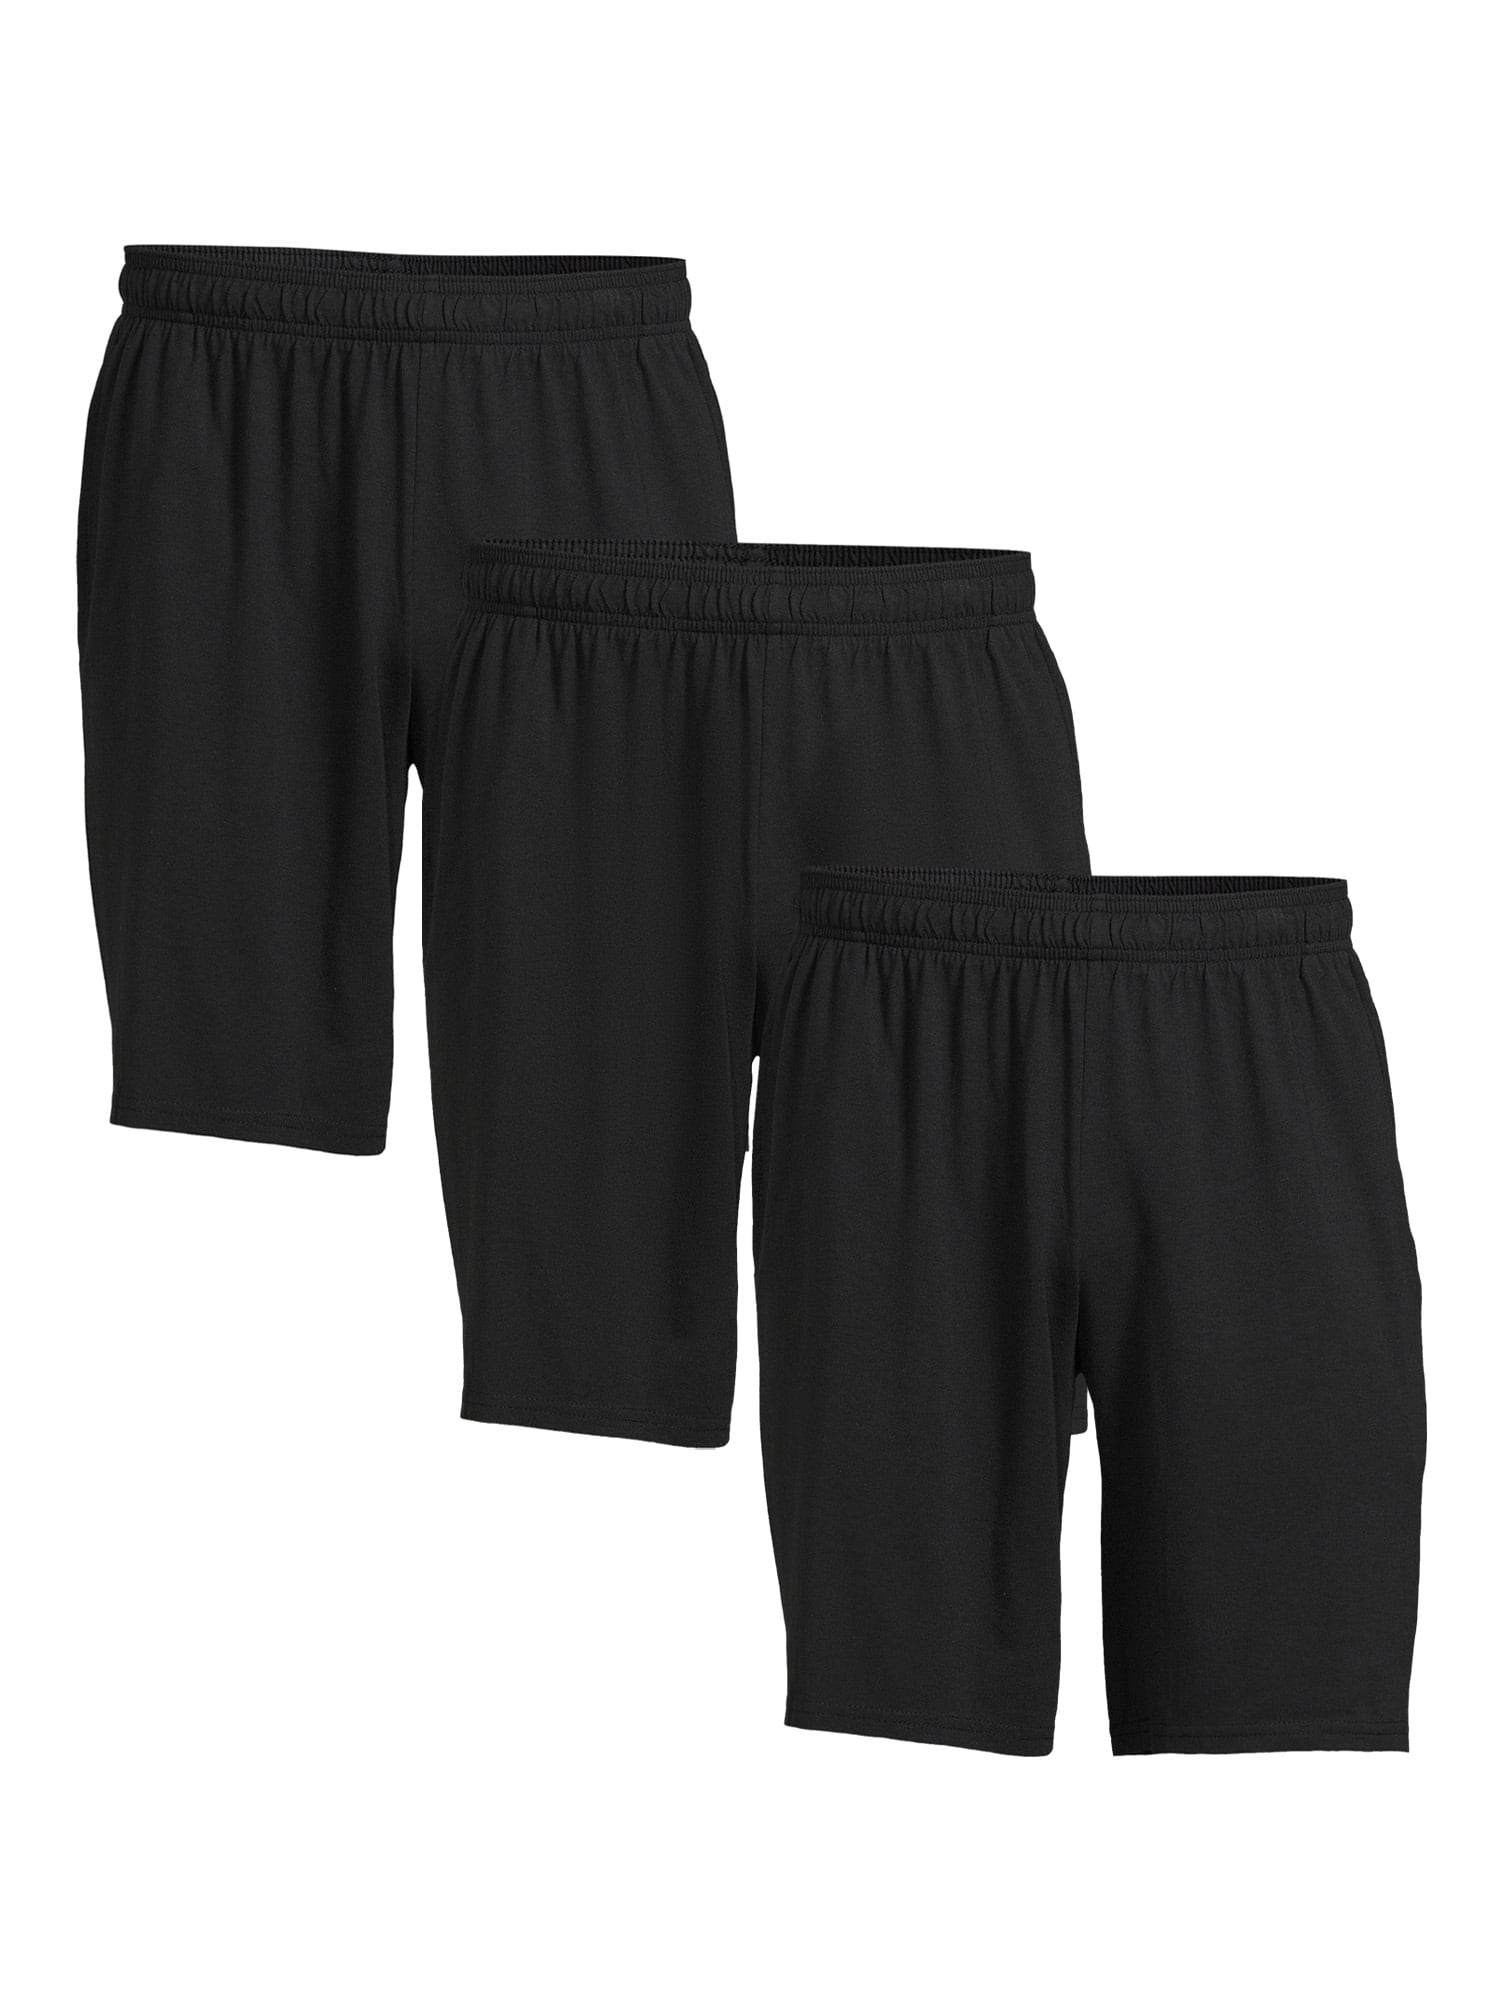 Athletic Works Men's and Big Men's Knit Shorts, 3-Pack, Sizes S